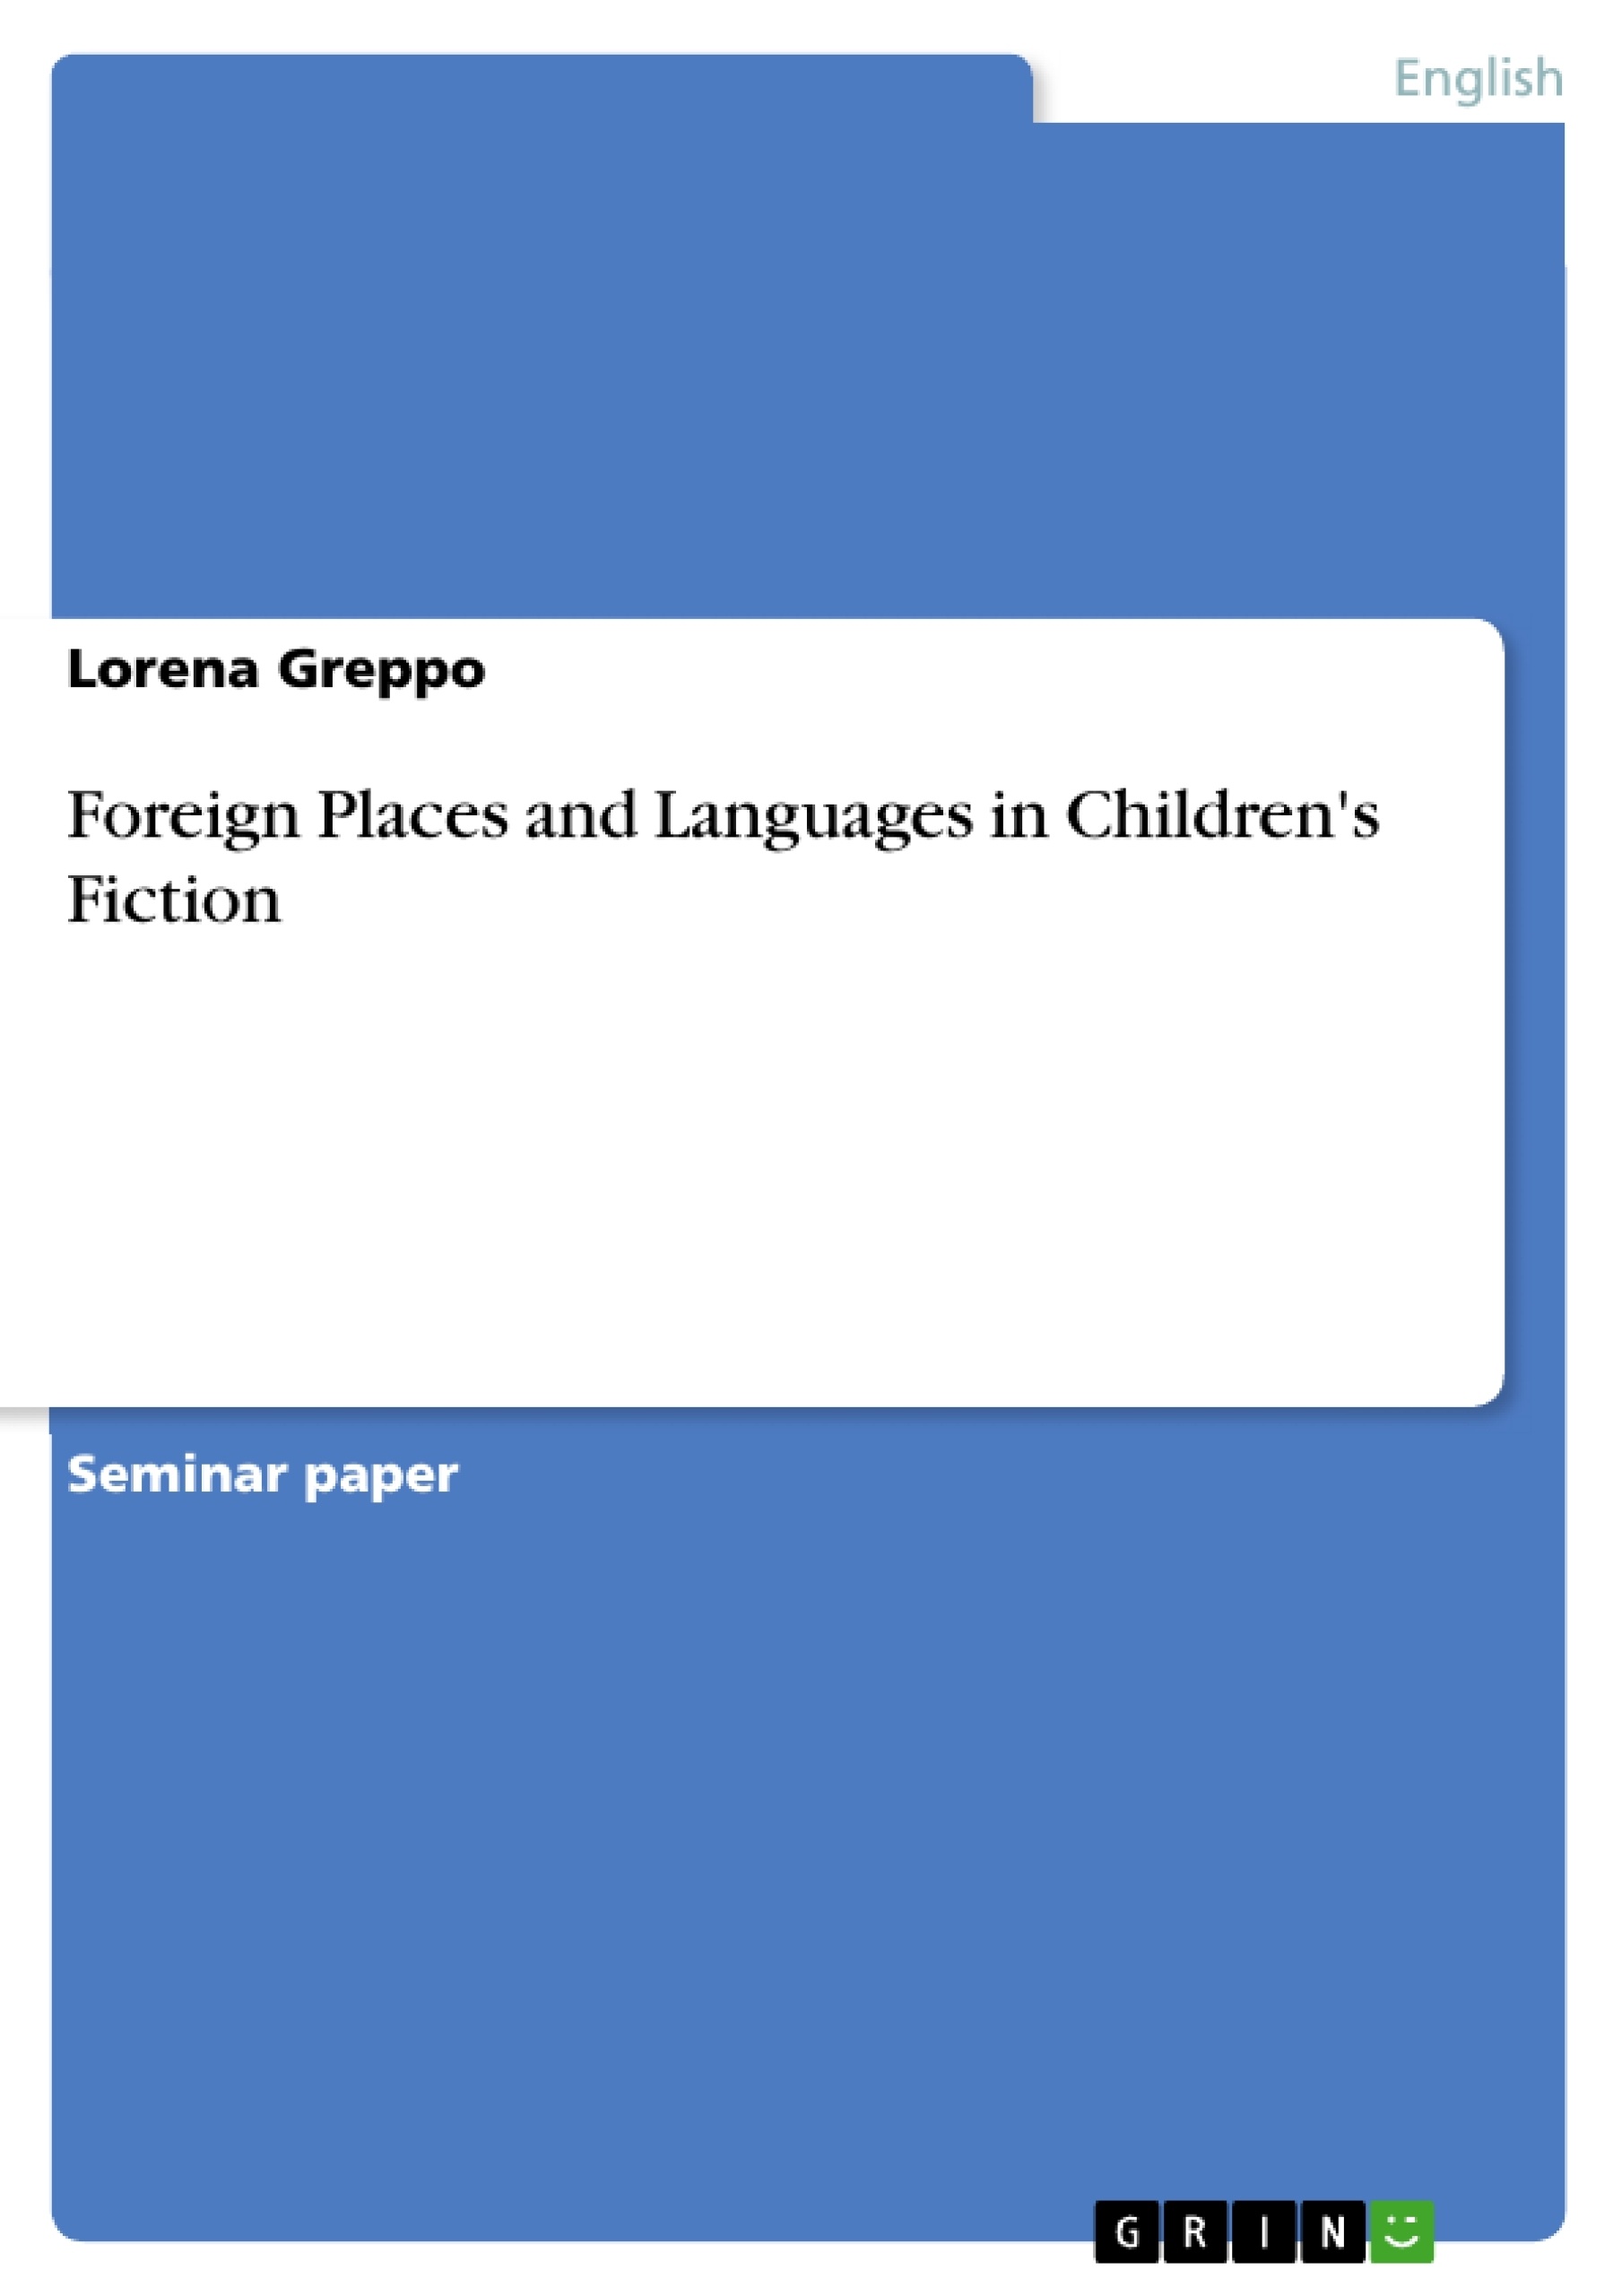 Título: Foreign Places and Languages in Children's Fiction